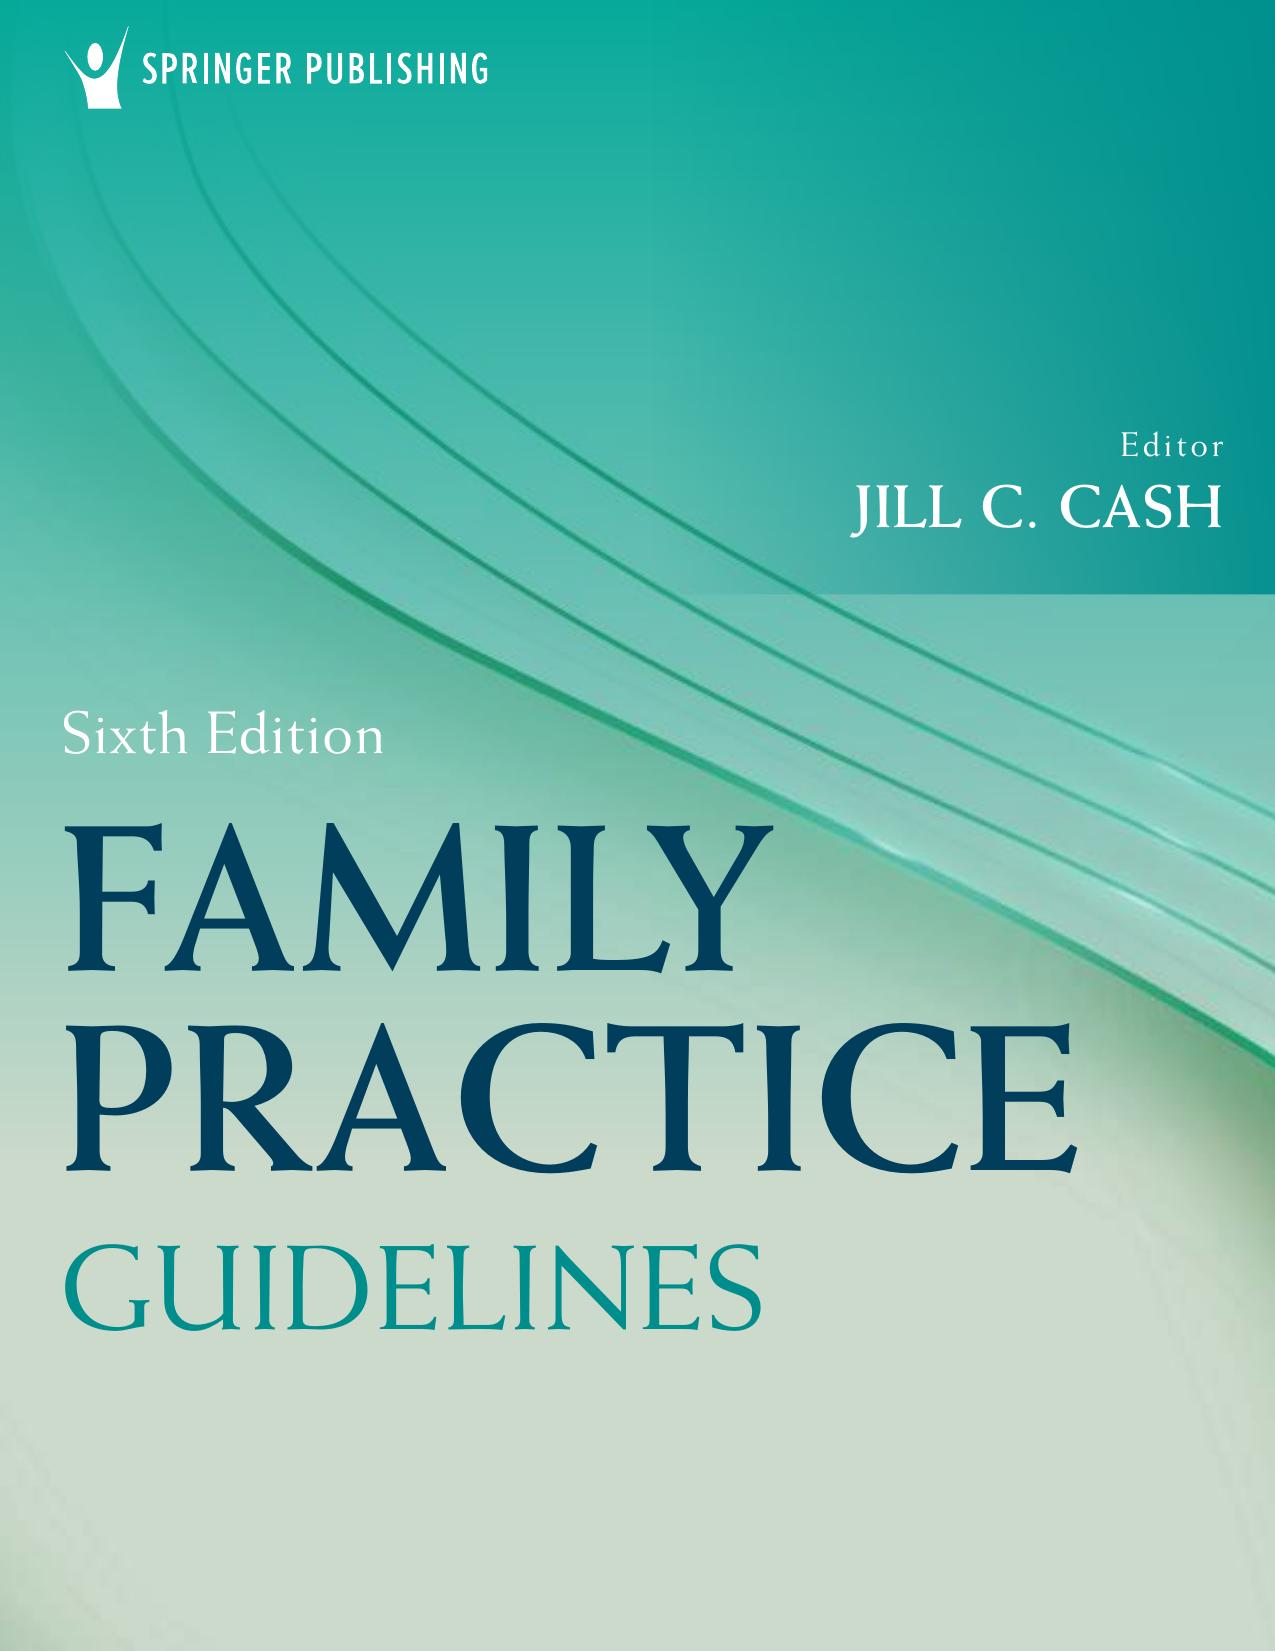 Family Practice Guidelines 6th Edition [Team-IRA] by Jill C. Cash MSN APN FNP-BC (editor) Cheryl A. Glass MSN APRN WHNP-BC (editor)